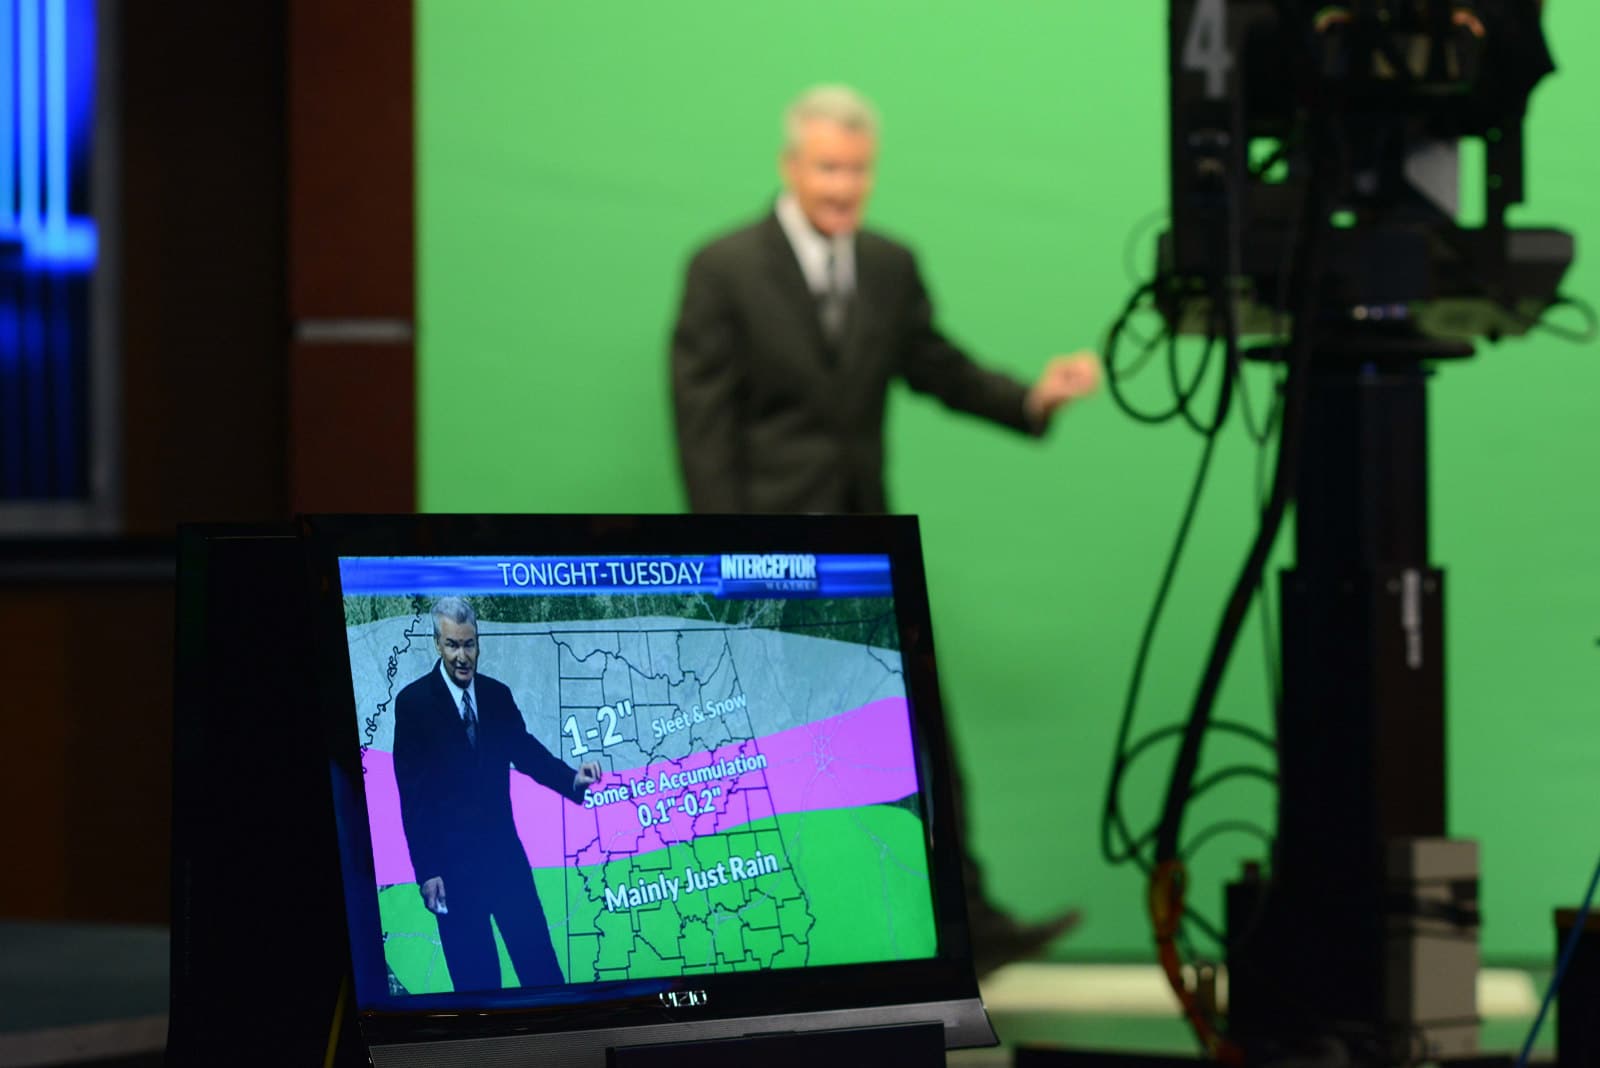 Jerry Tracy of WVTM 13 in front of a green screen